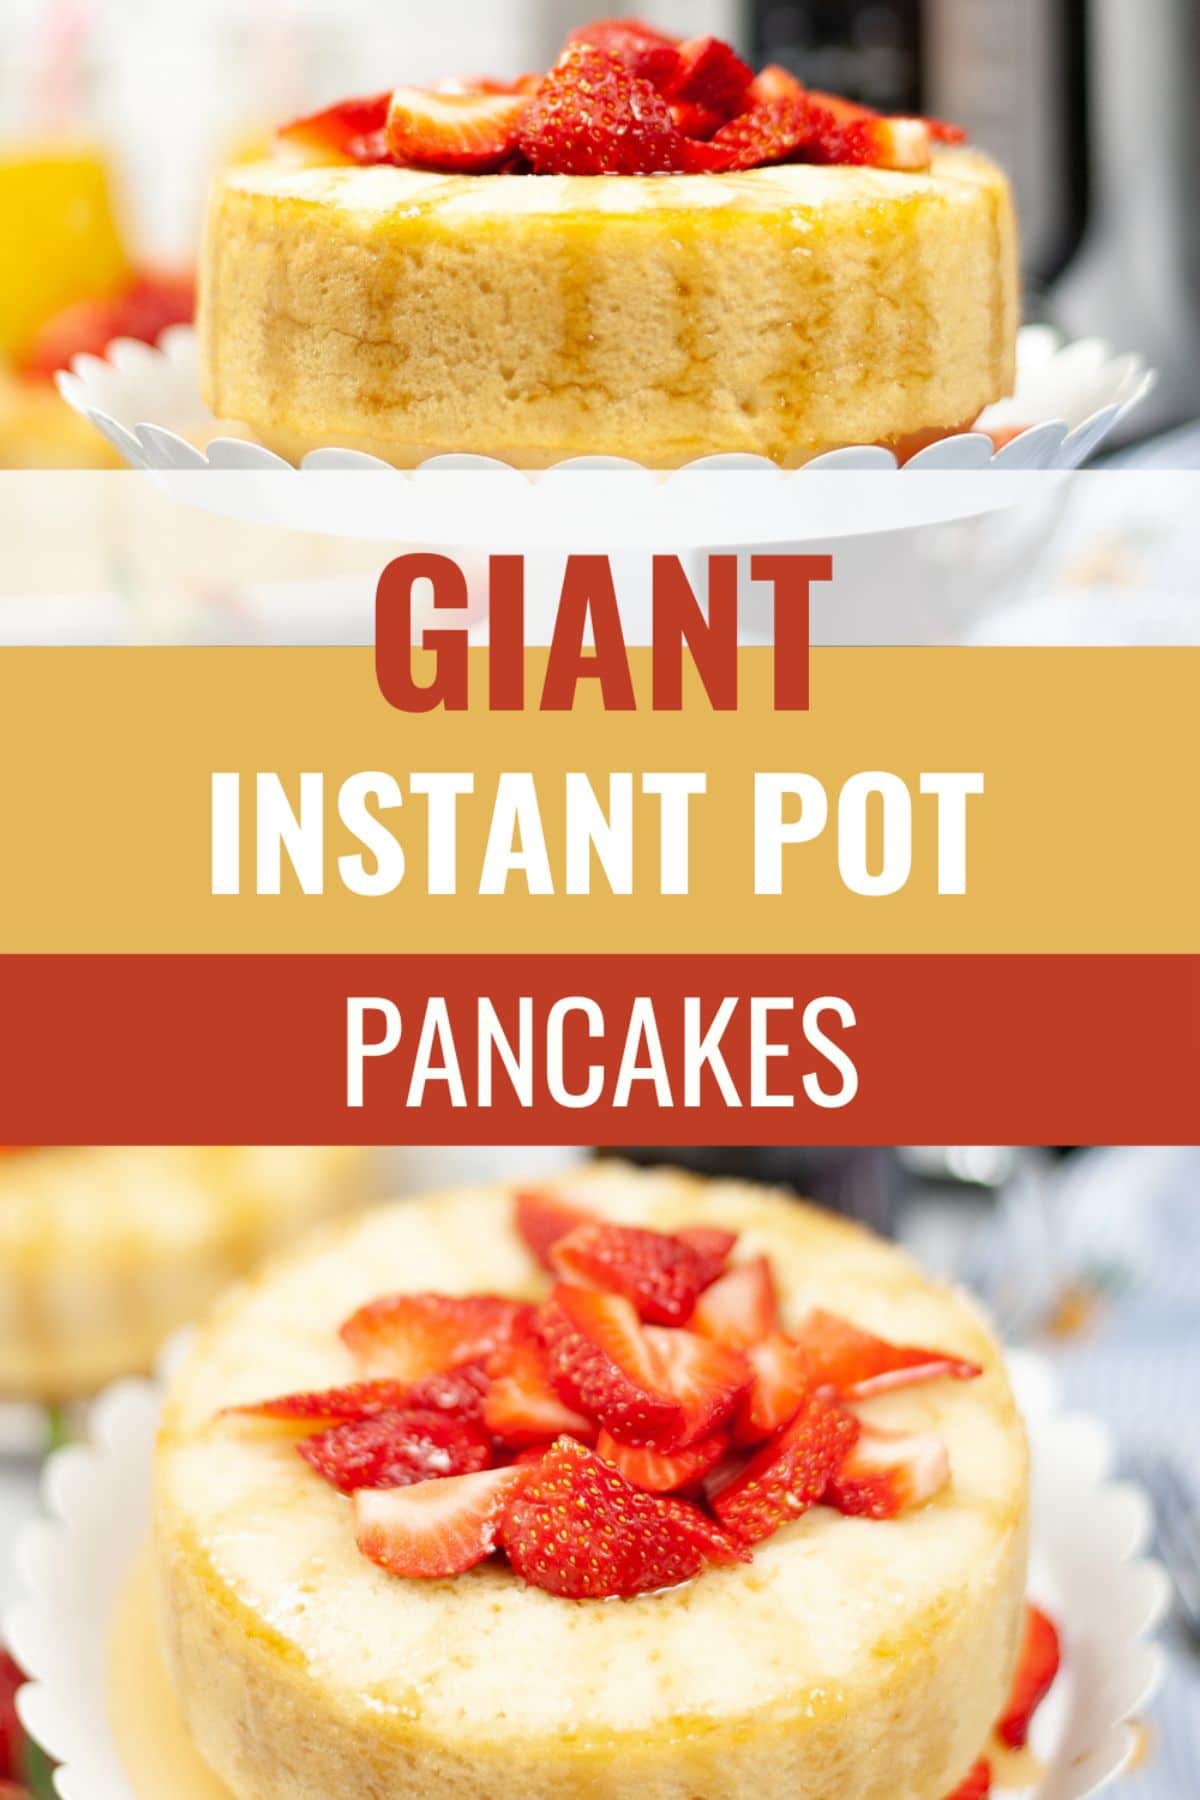 These Giant Instant Pot Pancakes cook up in minutes and are perfect for a weekend breakfast or brunch. Customize with your favorite toppings! #instantpot #pressurecooker #instatntpotpancakes #japanesesoufflepancakes #breakfast via @wondermomwannab